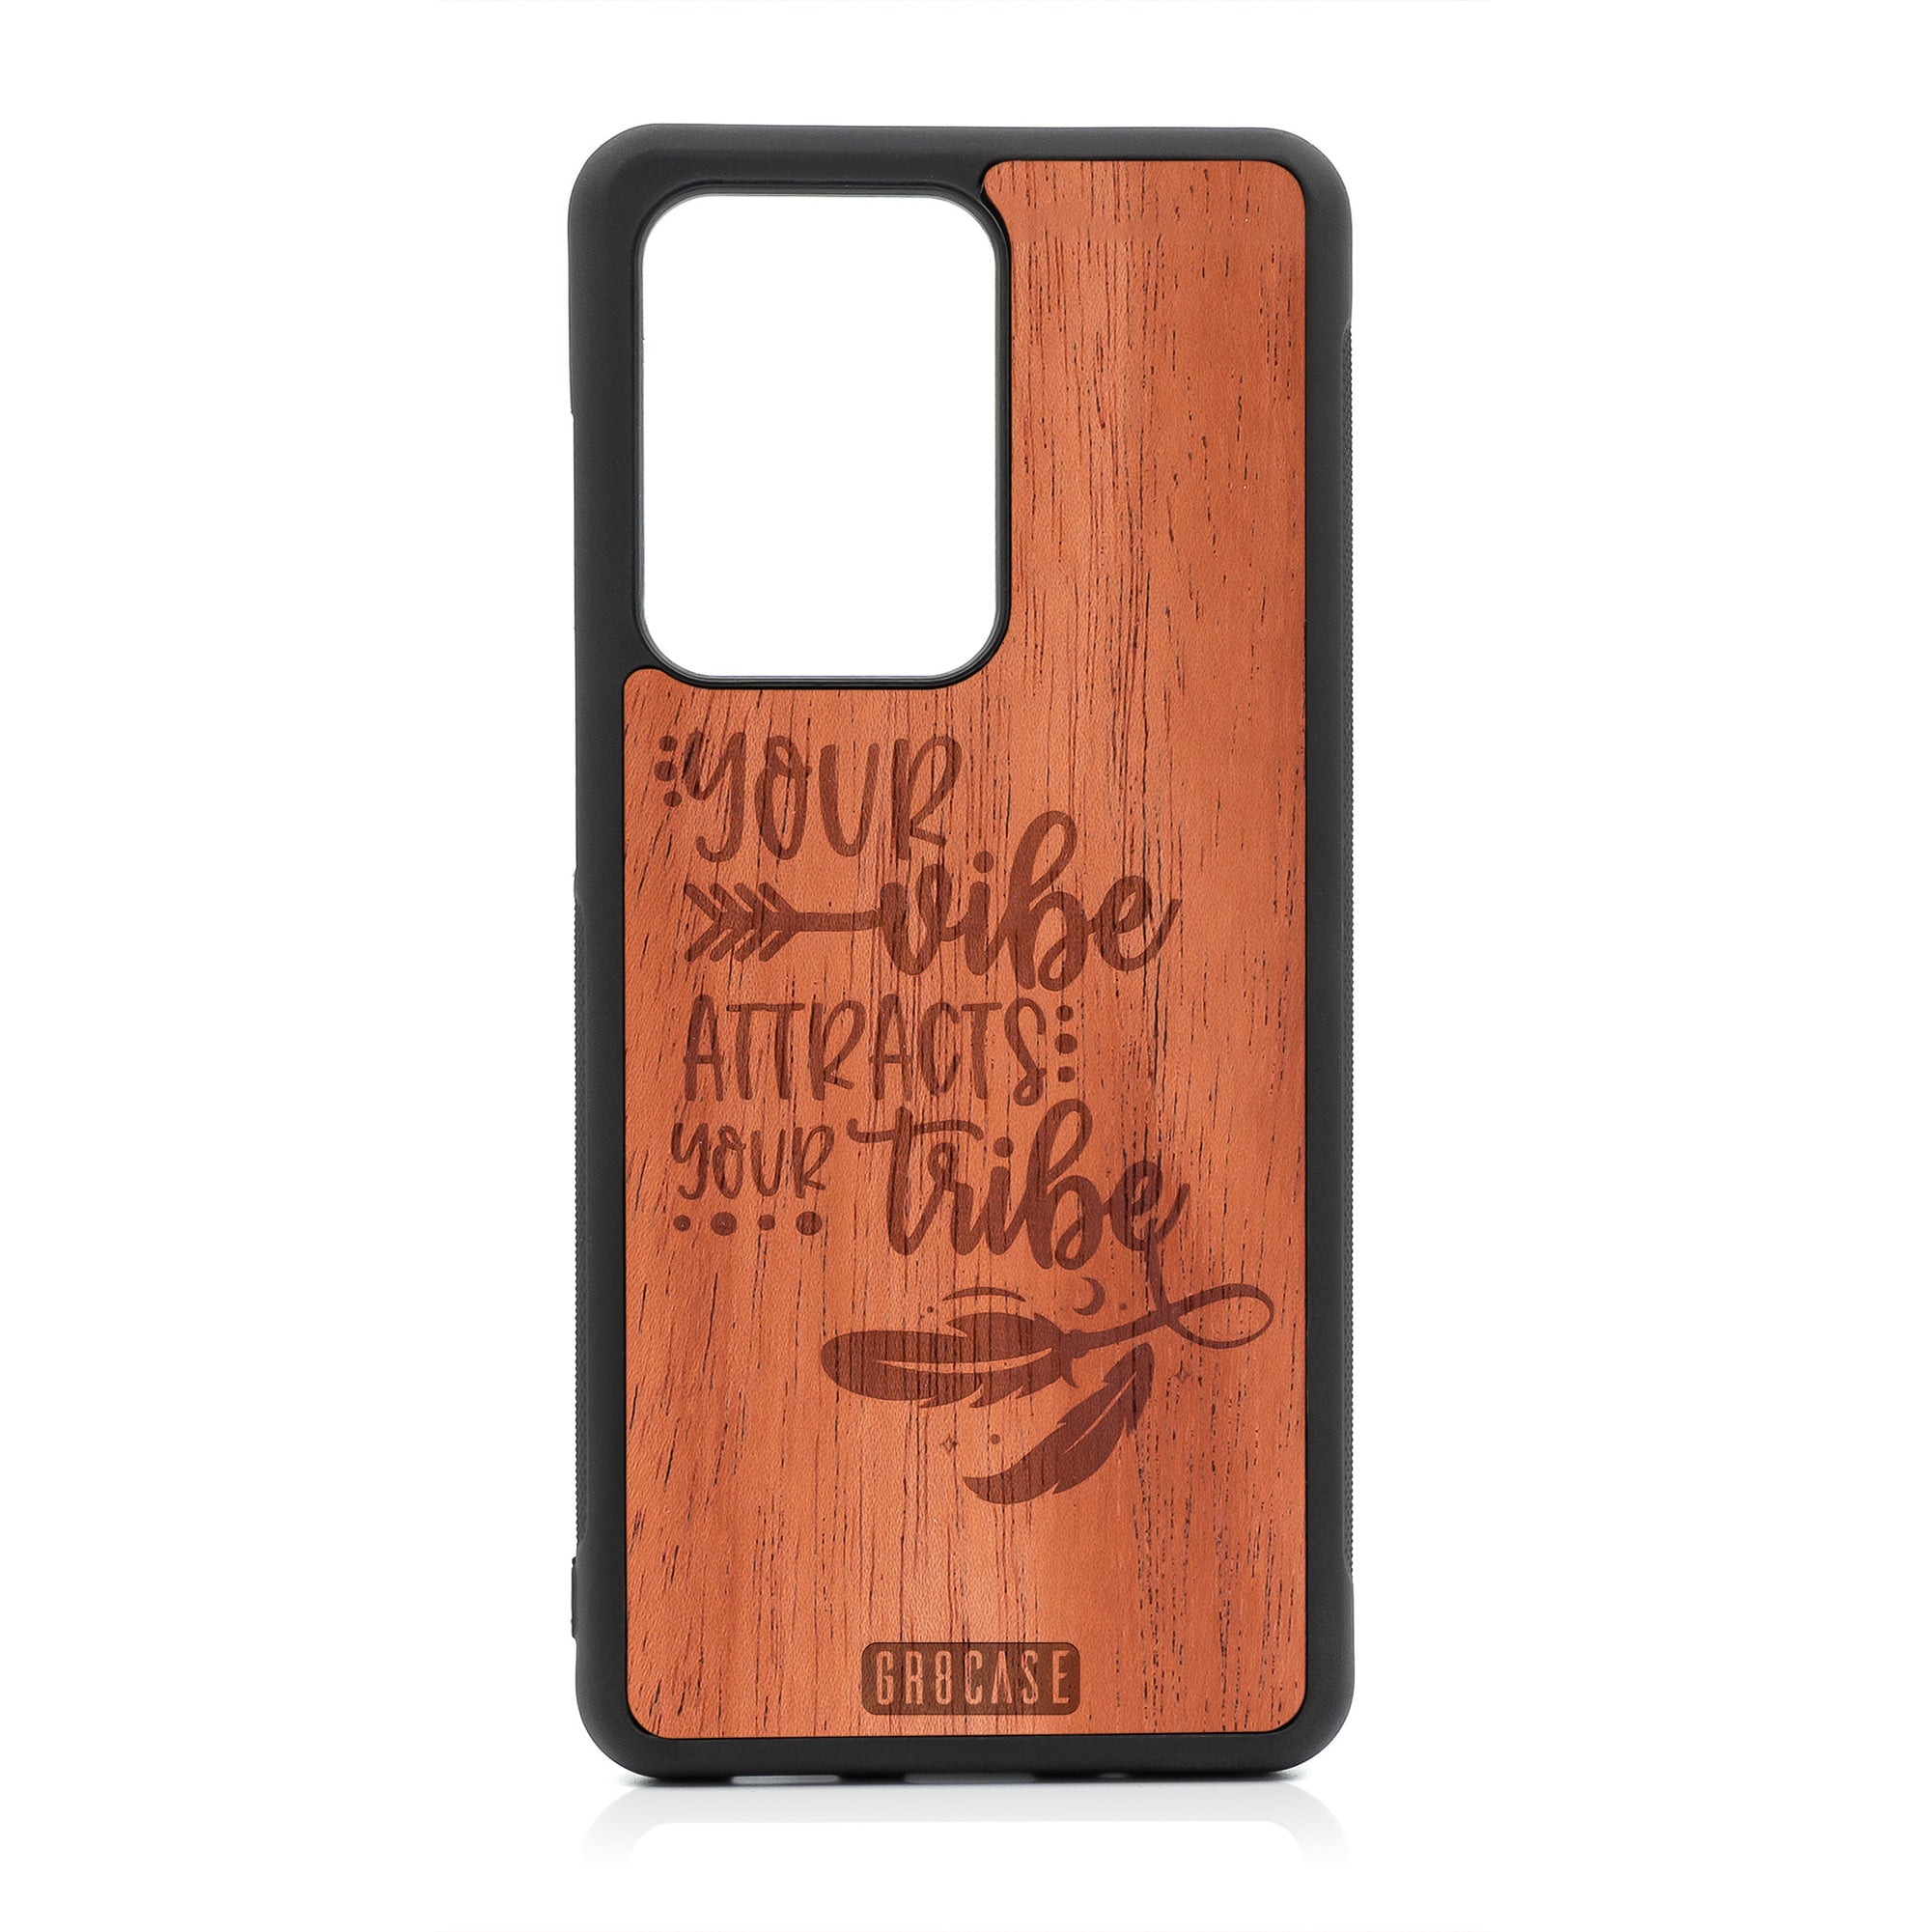 Your Vibe Attracts Your Tribe Design Wood Case For Samsung Galaxy S20 Ultra